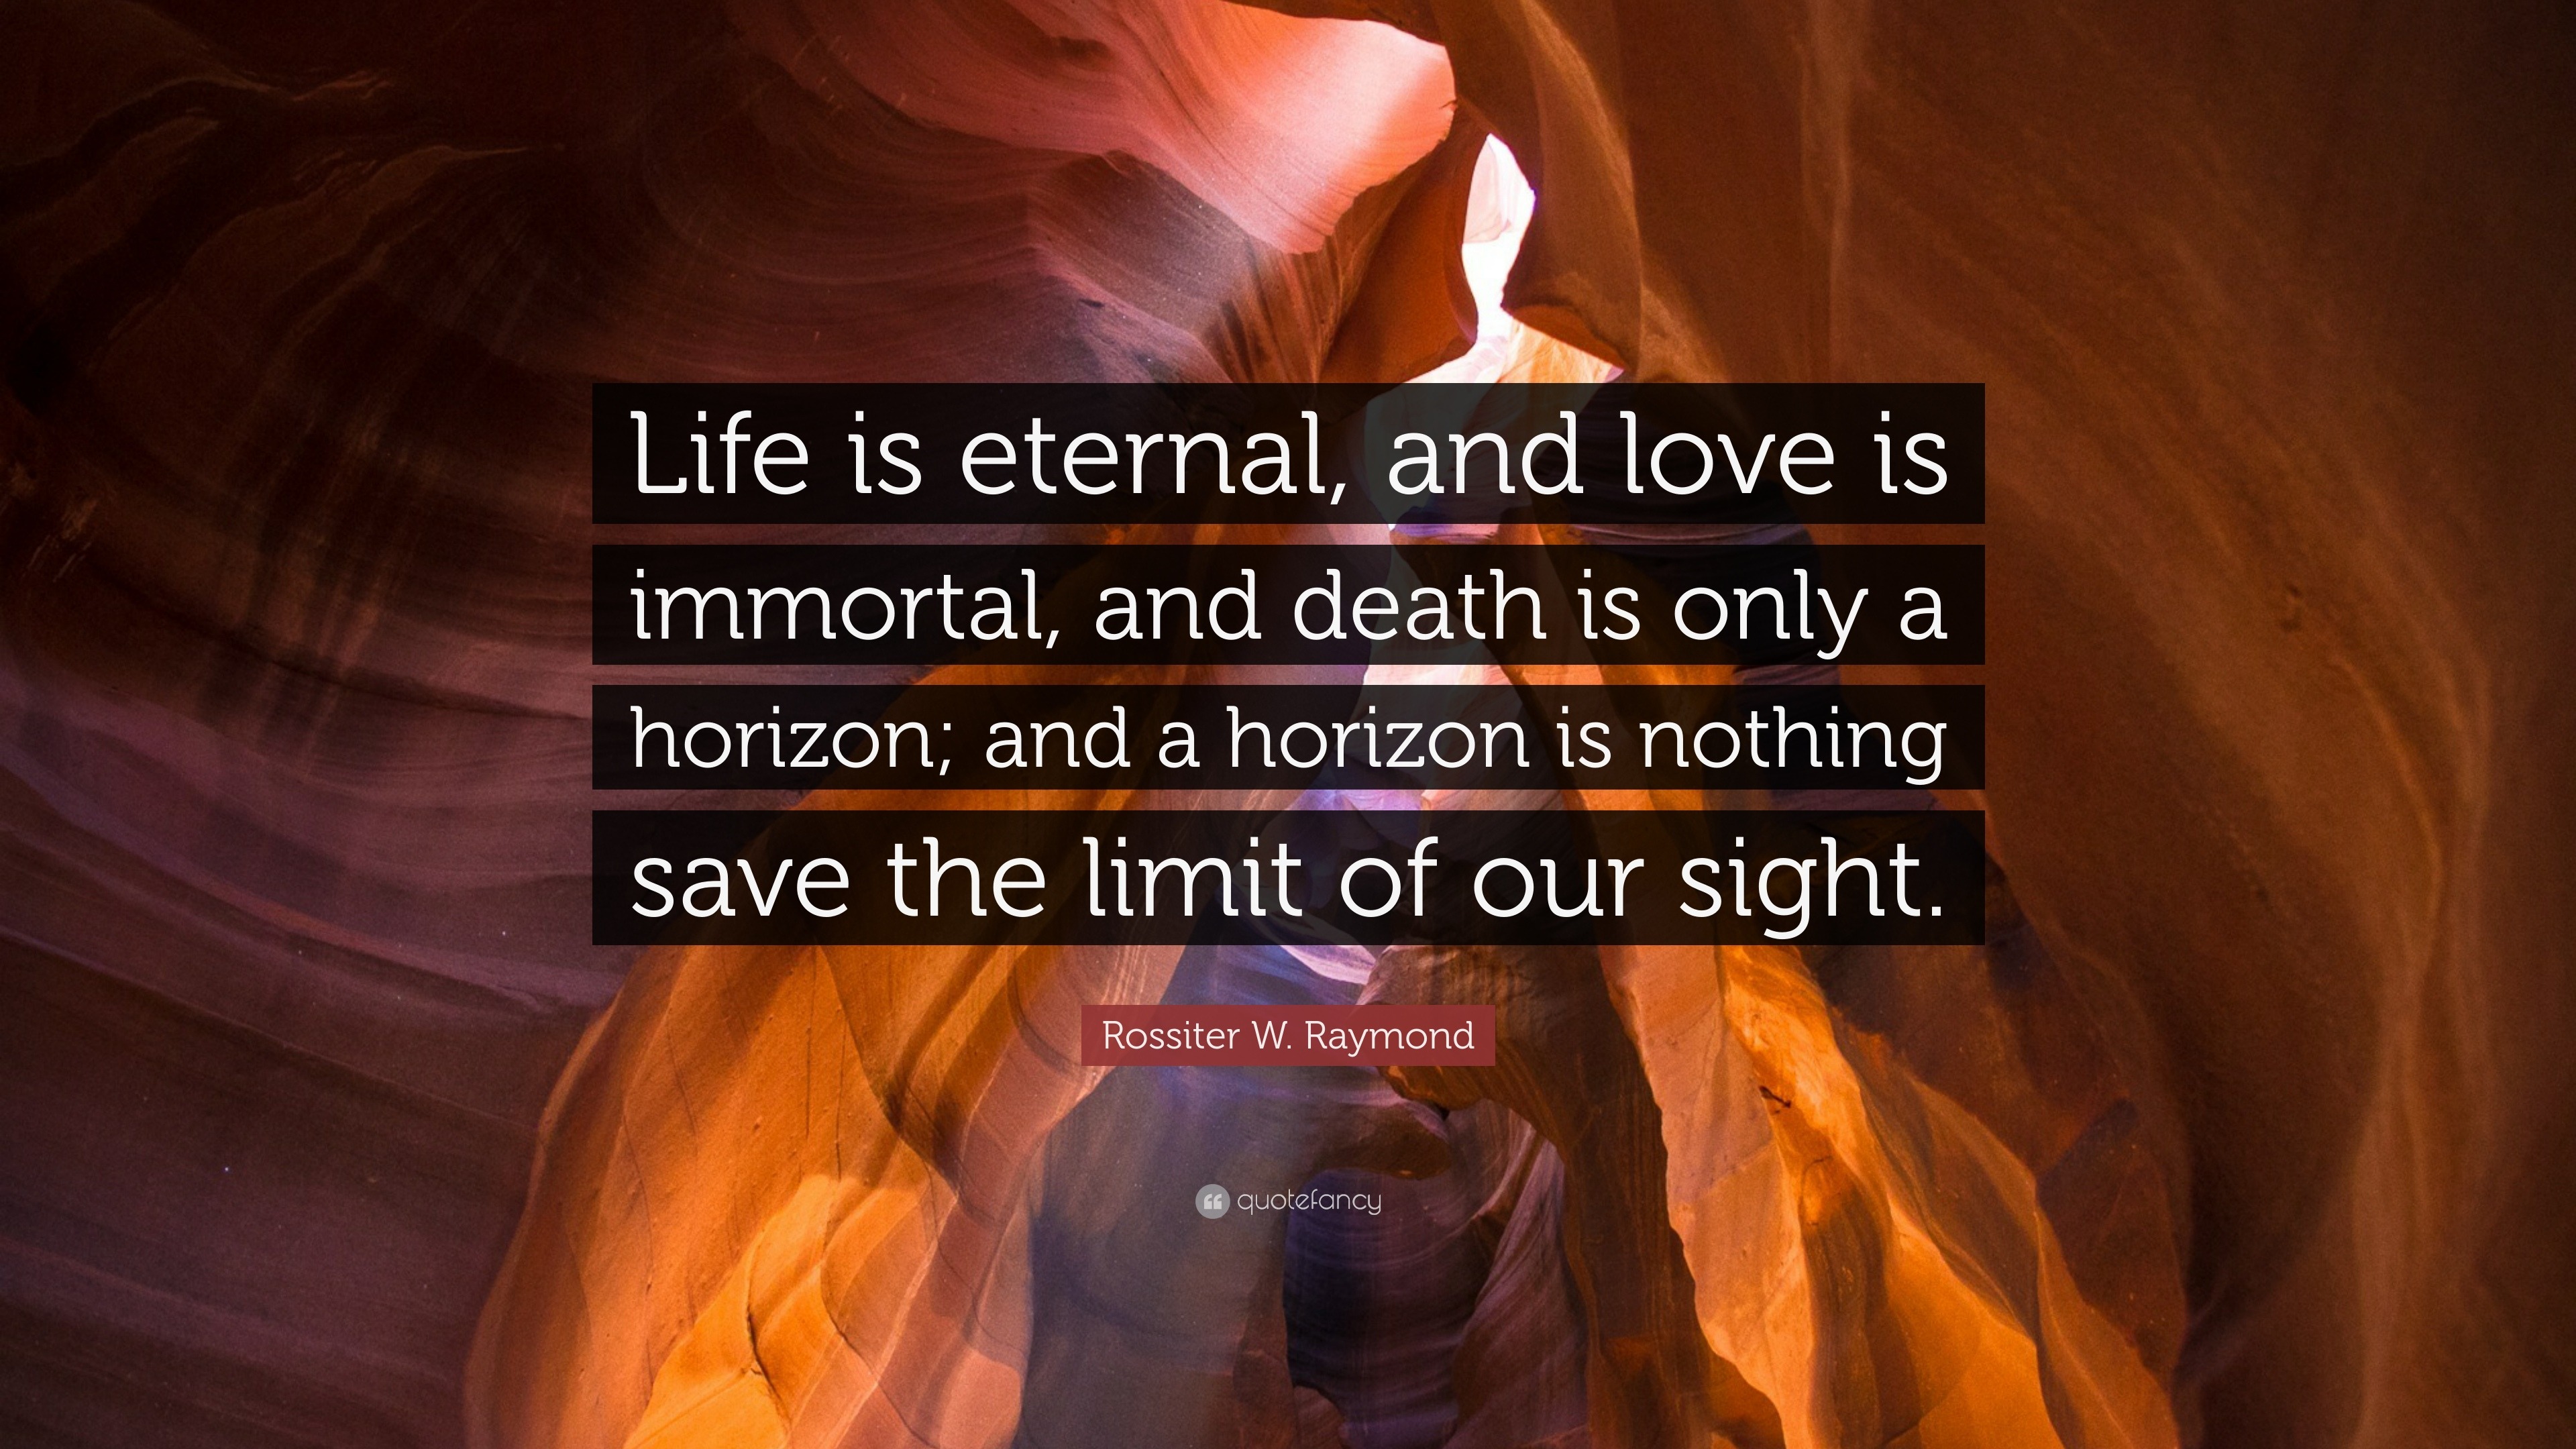 Rossiter W Raymond Quote “Life is eternal and love is immortal